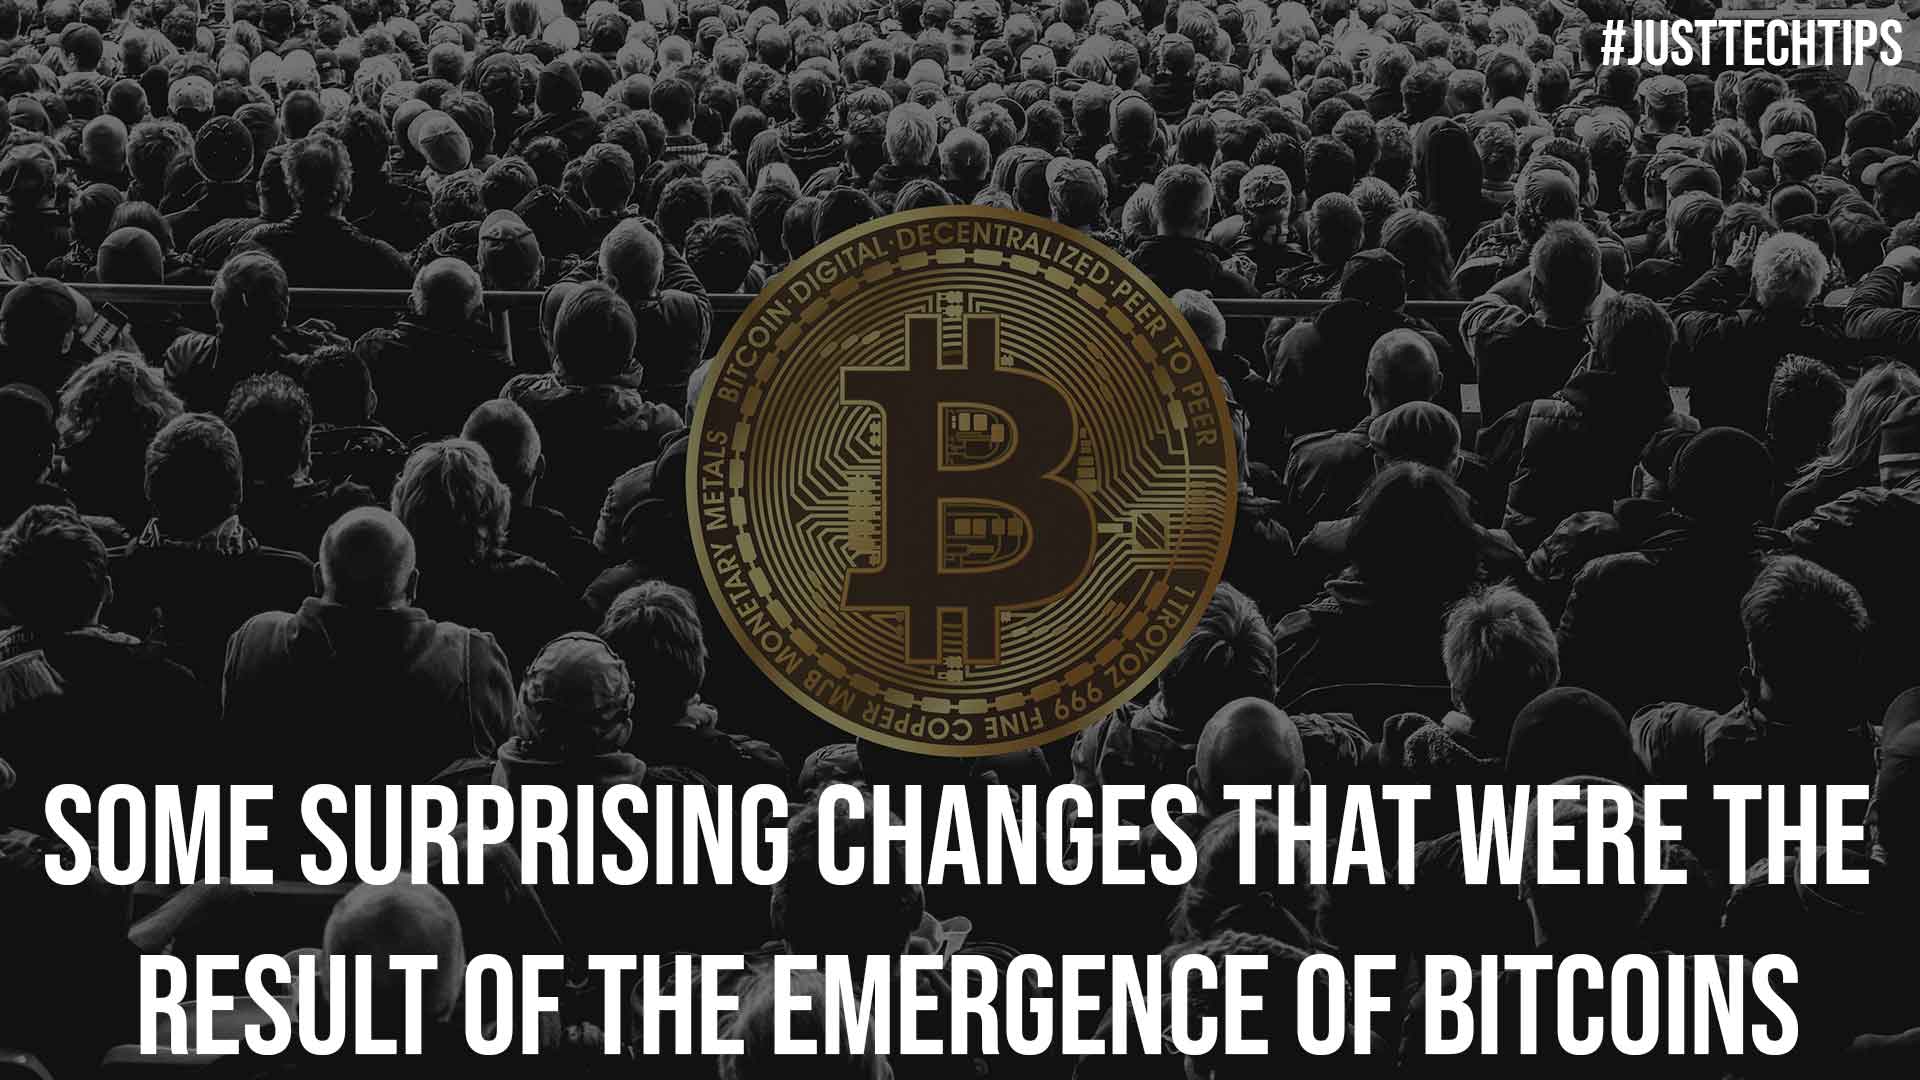 Some Surprising Changes that Were the Result of the Emergence of Bitcoins